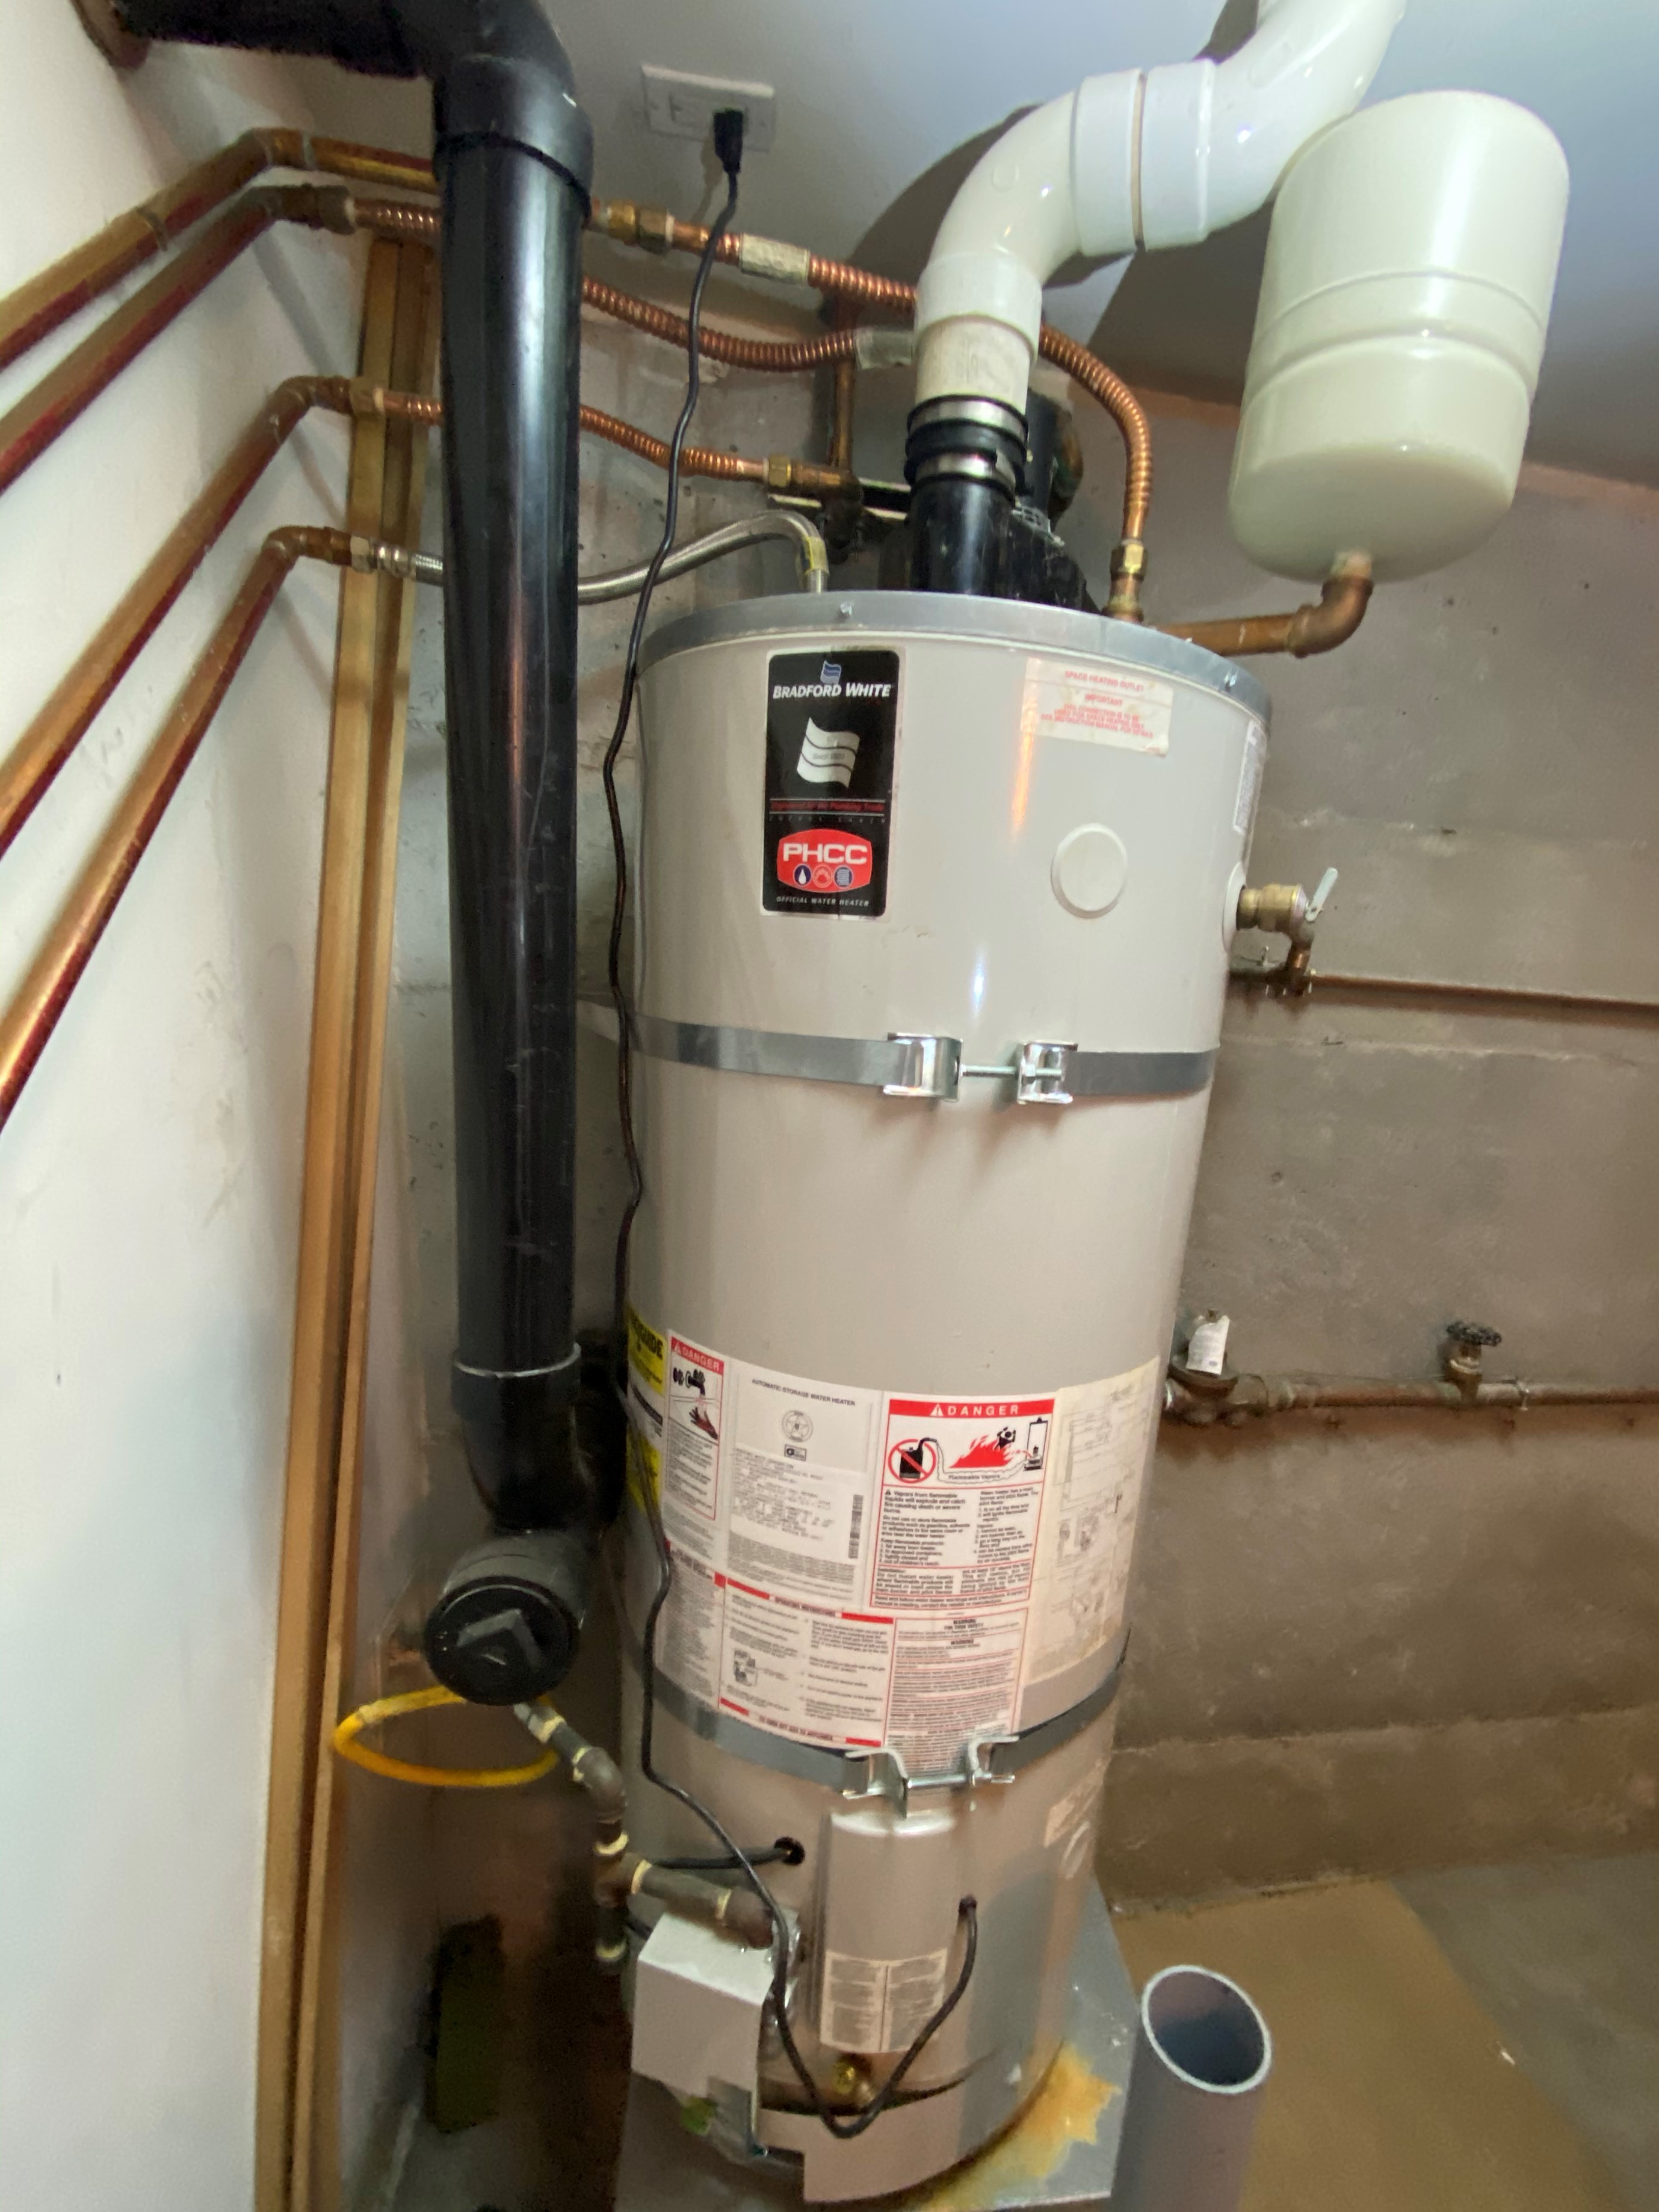 Power vent water heater installed on a residential property that is hooked up to the hydronic system as well as the domestic hot water.